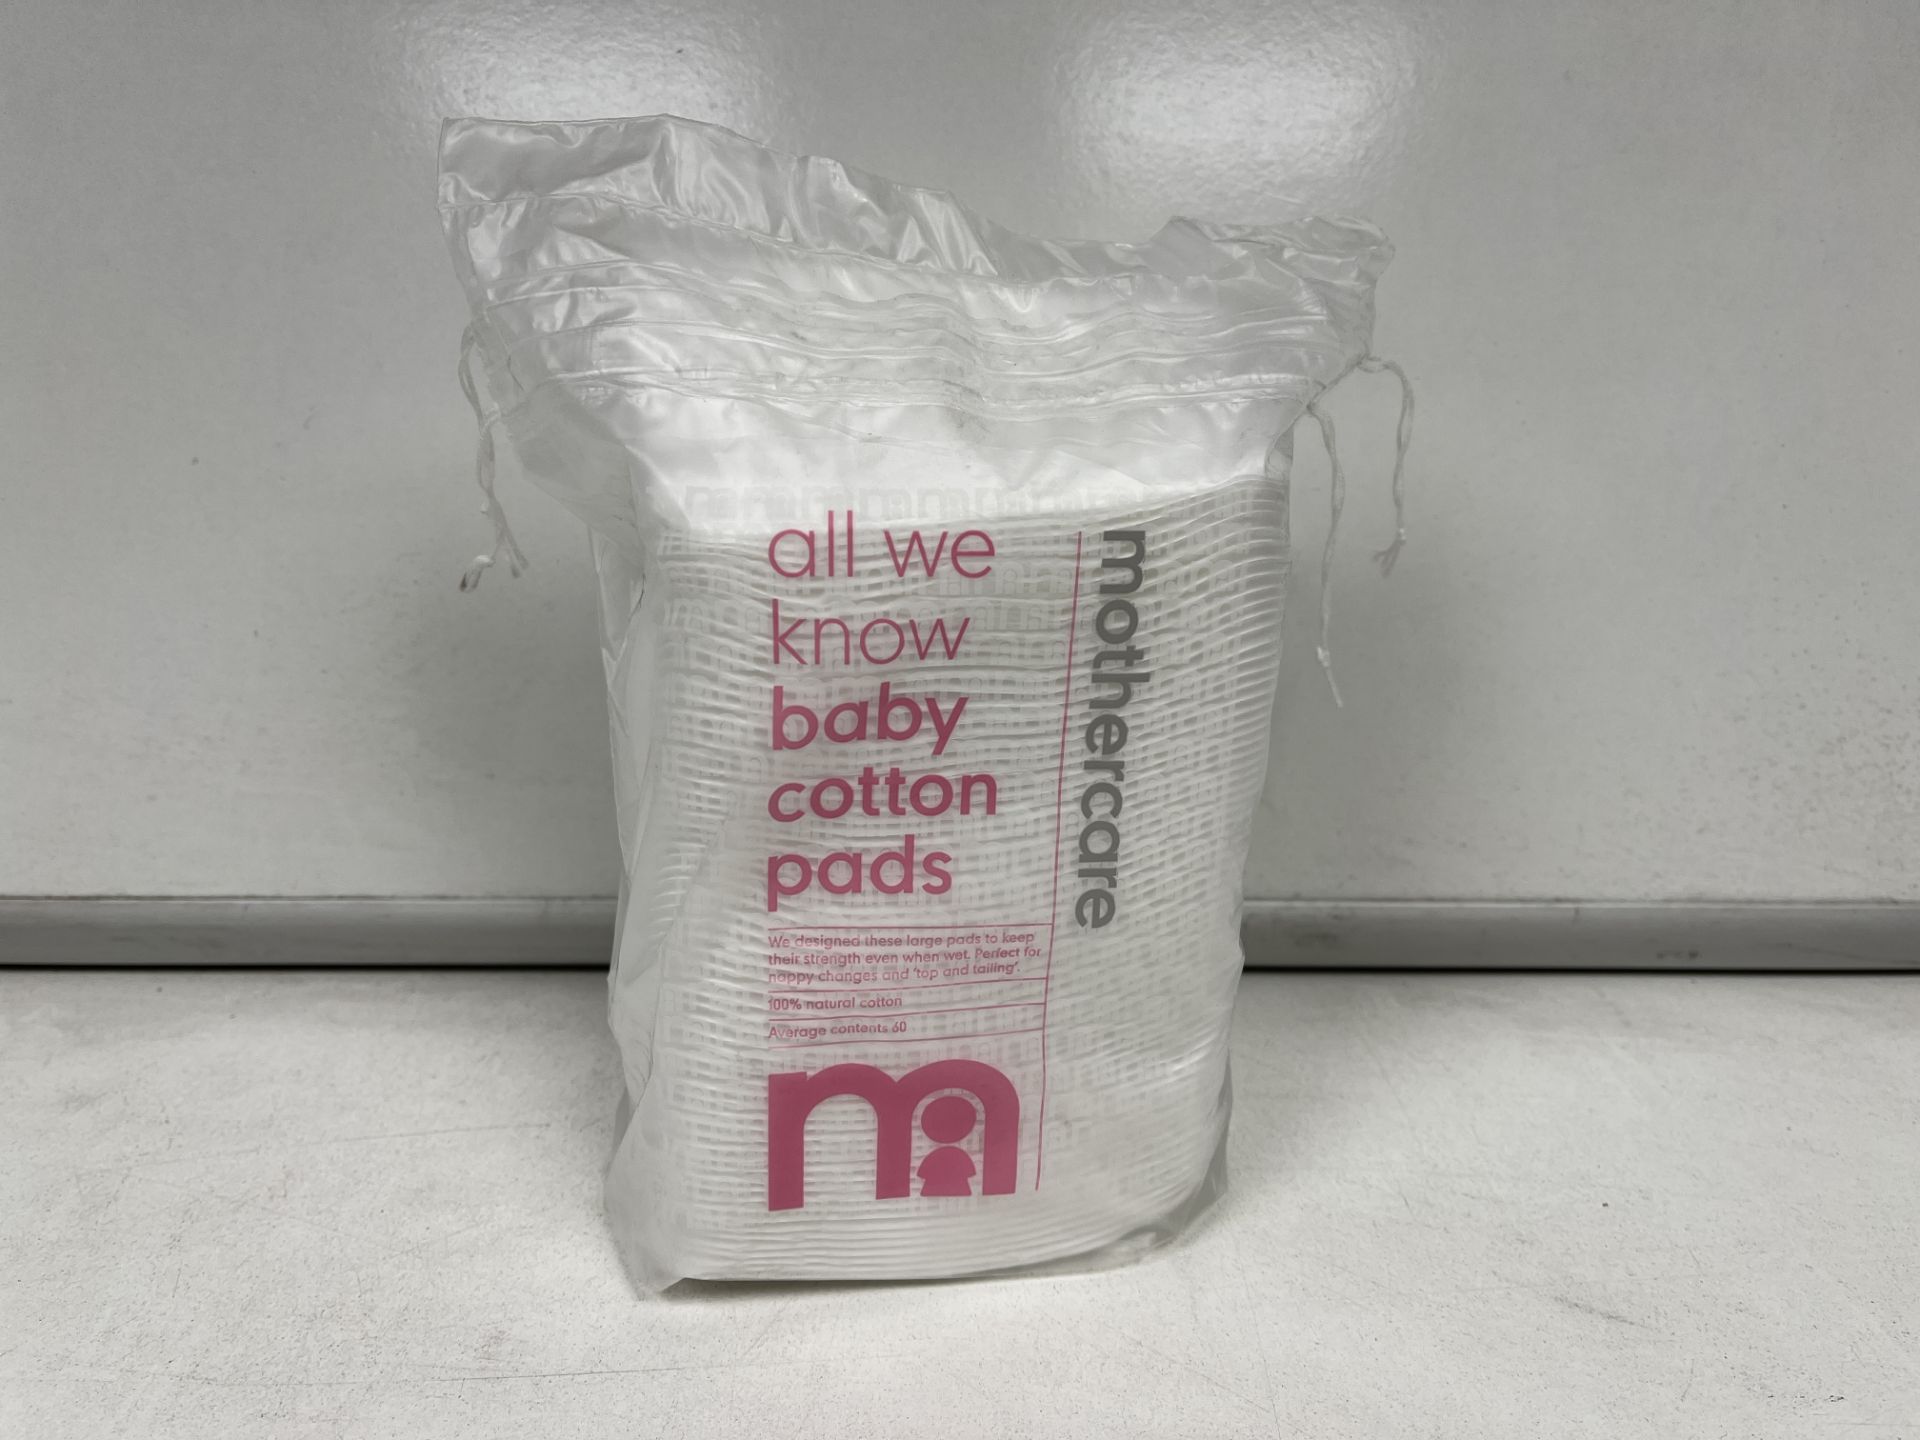 180 X BRAND NEW PACKS OF MOTHERCARE ALL WE KNOW BABY COTTON PADS R2